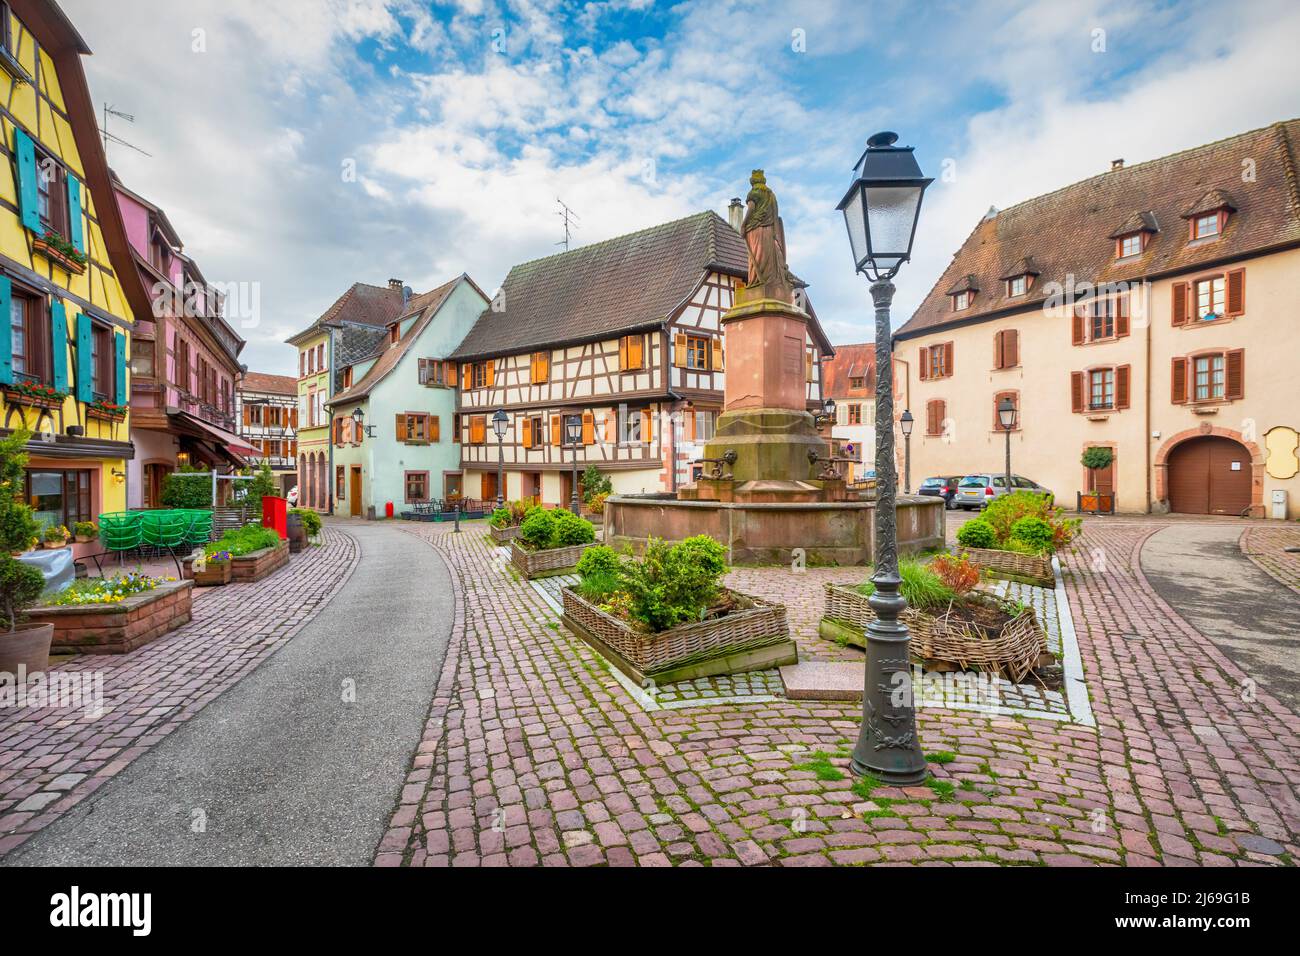 Ribeauville, France. Colorful half-timbered houses on Place de la Sinne square Stock Photo